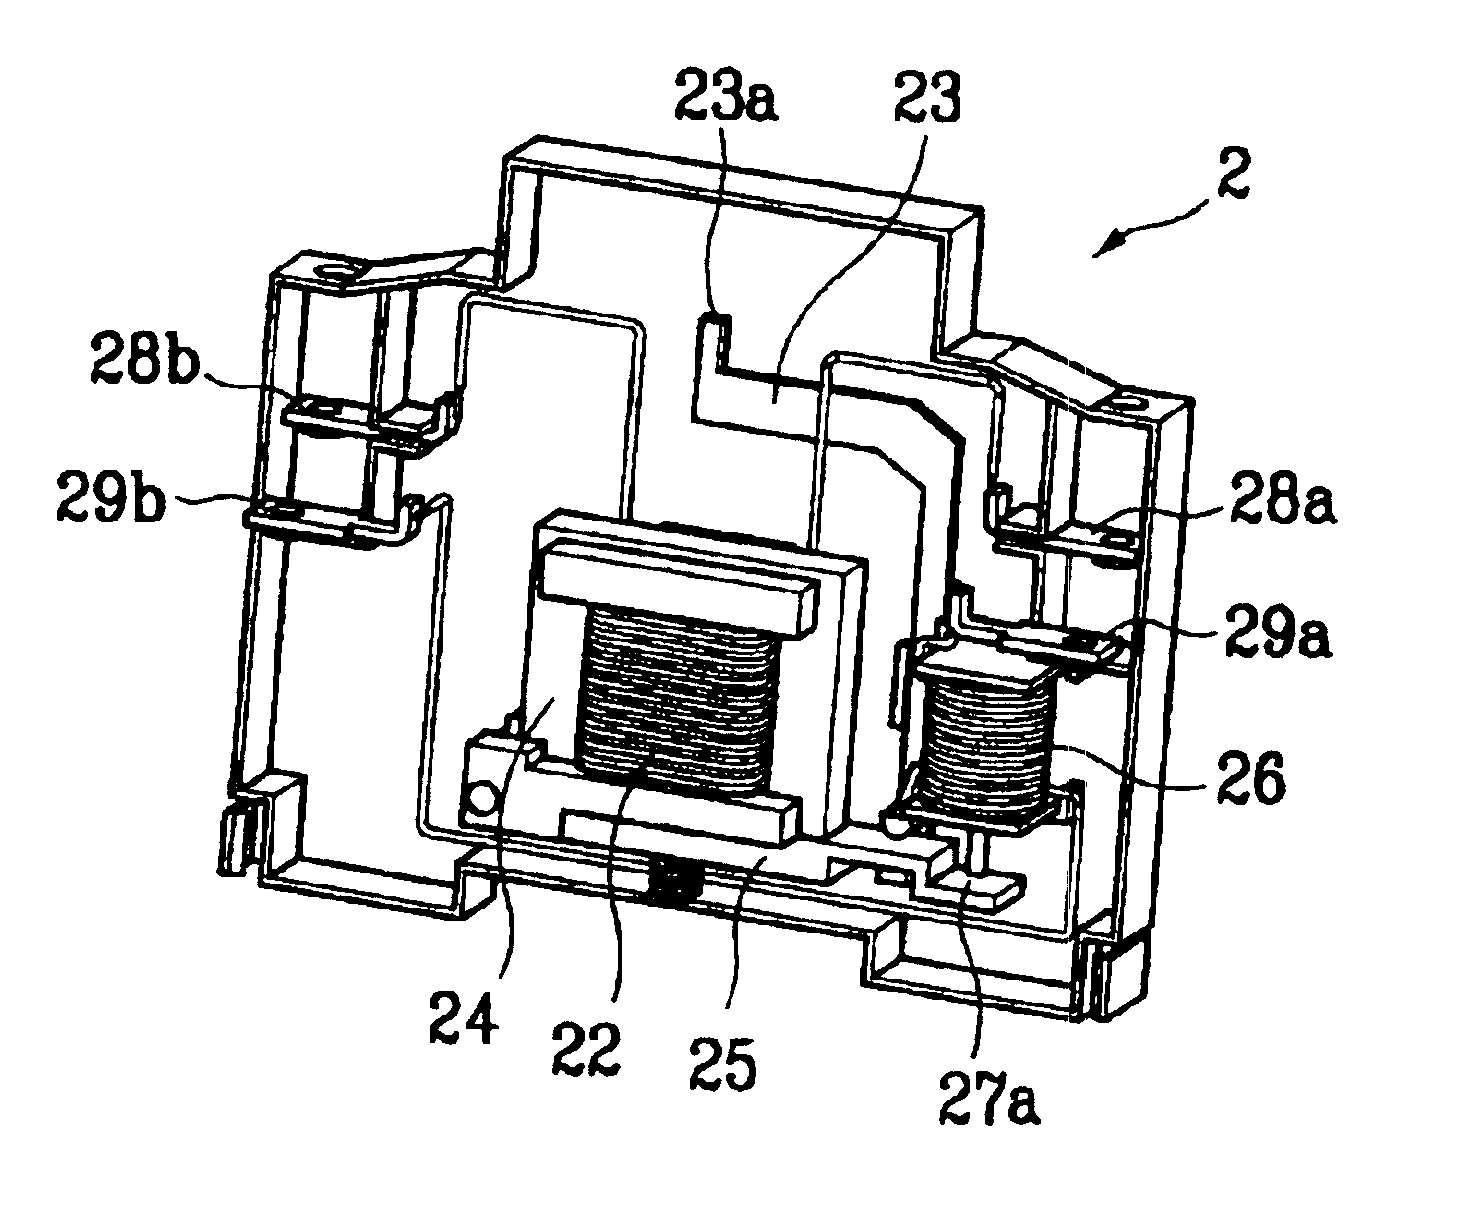 Accessory device for manual motor starter